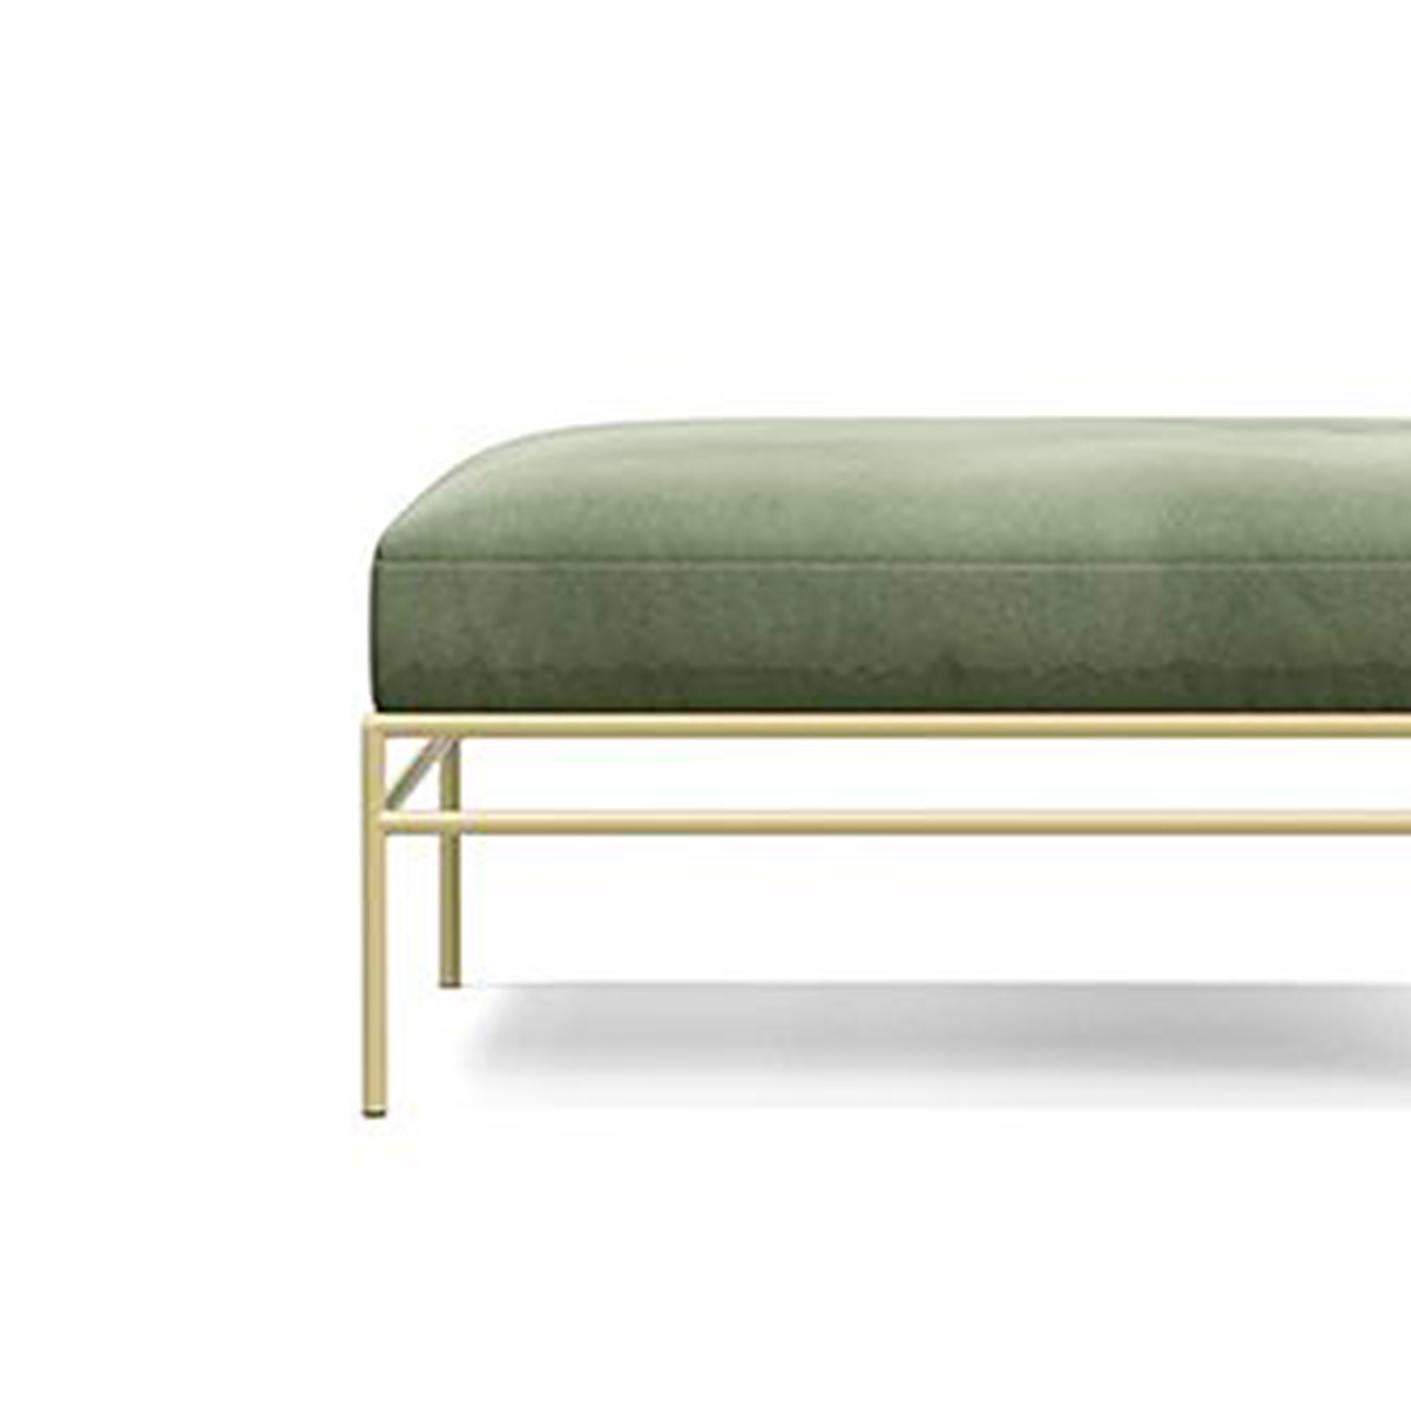 'Middleweight' Pouf designed by Michael Anastassiades for Karakter.

Middleweight is Michael Anastassiades’ very first upholstered piece of furniture. 

“This was my first sofa design, but actually the biggest surprise didn’t come until the